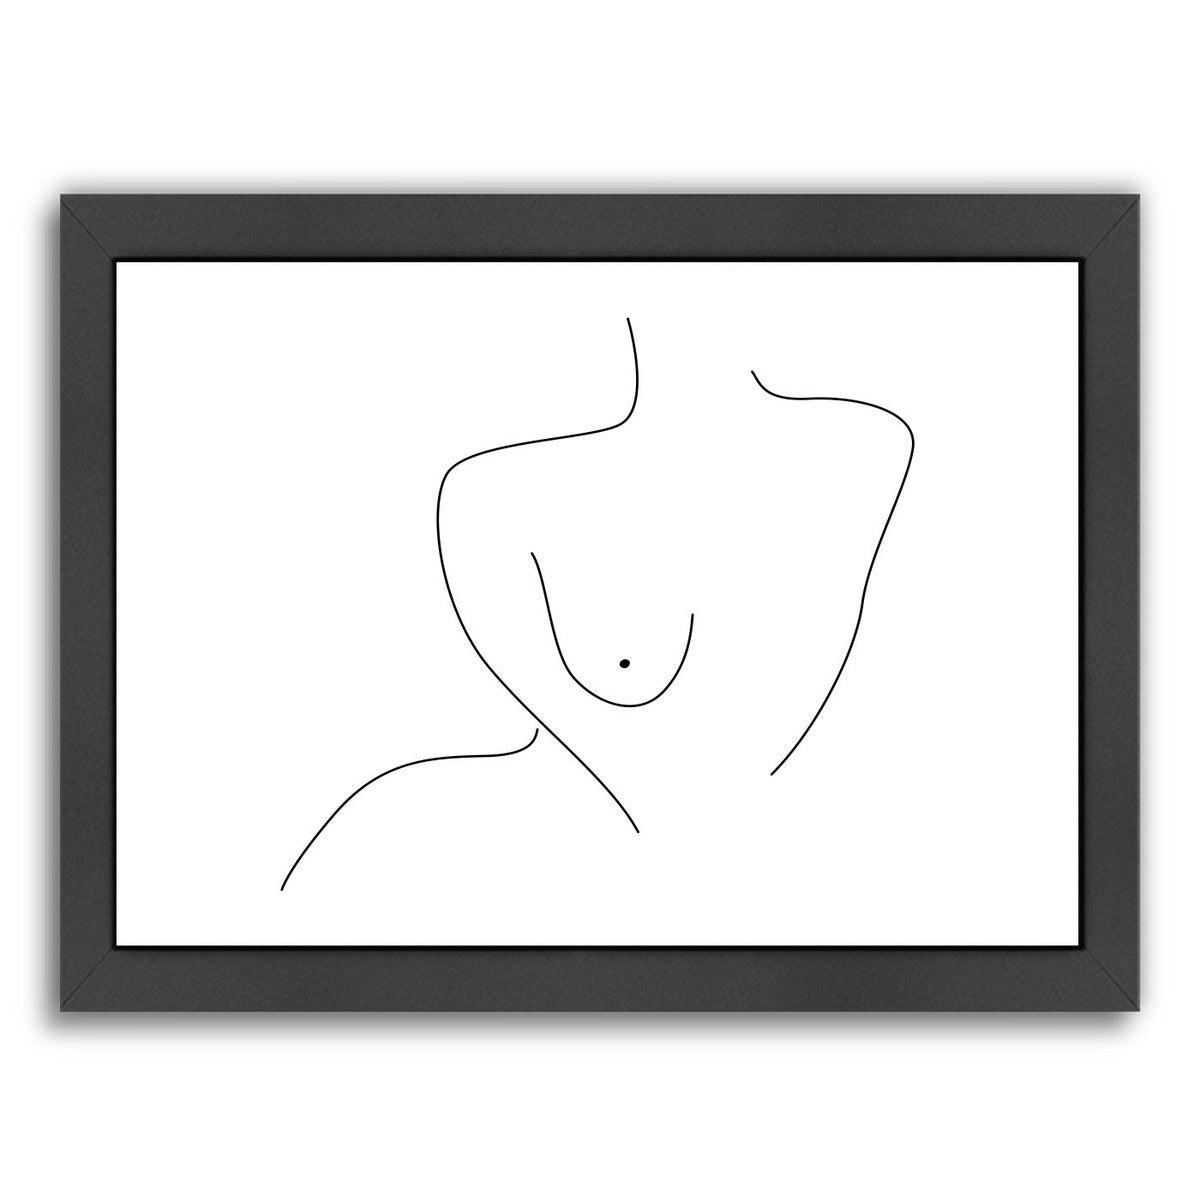 Sexual Figure Lines by Explicit Design Framed Print - Americanflat